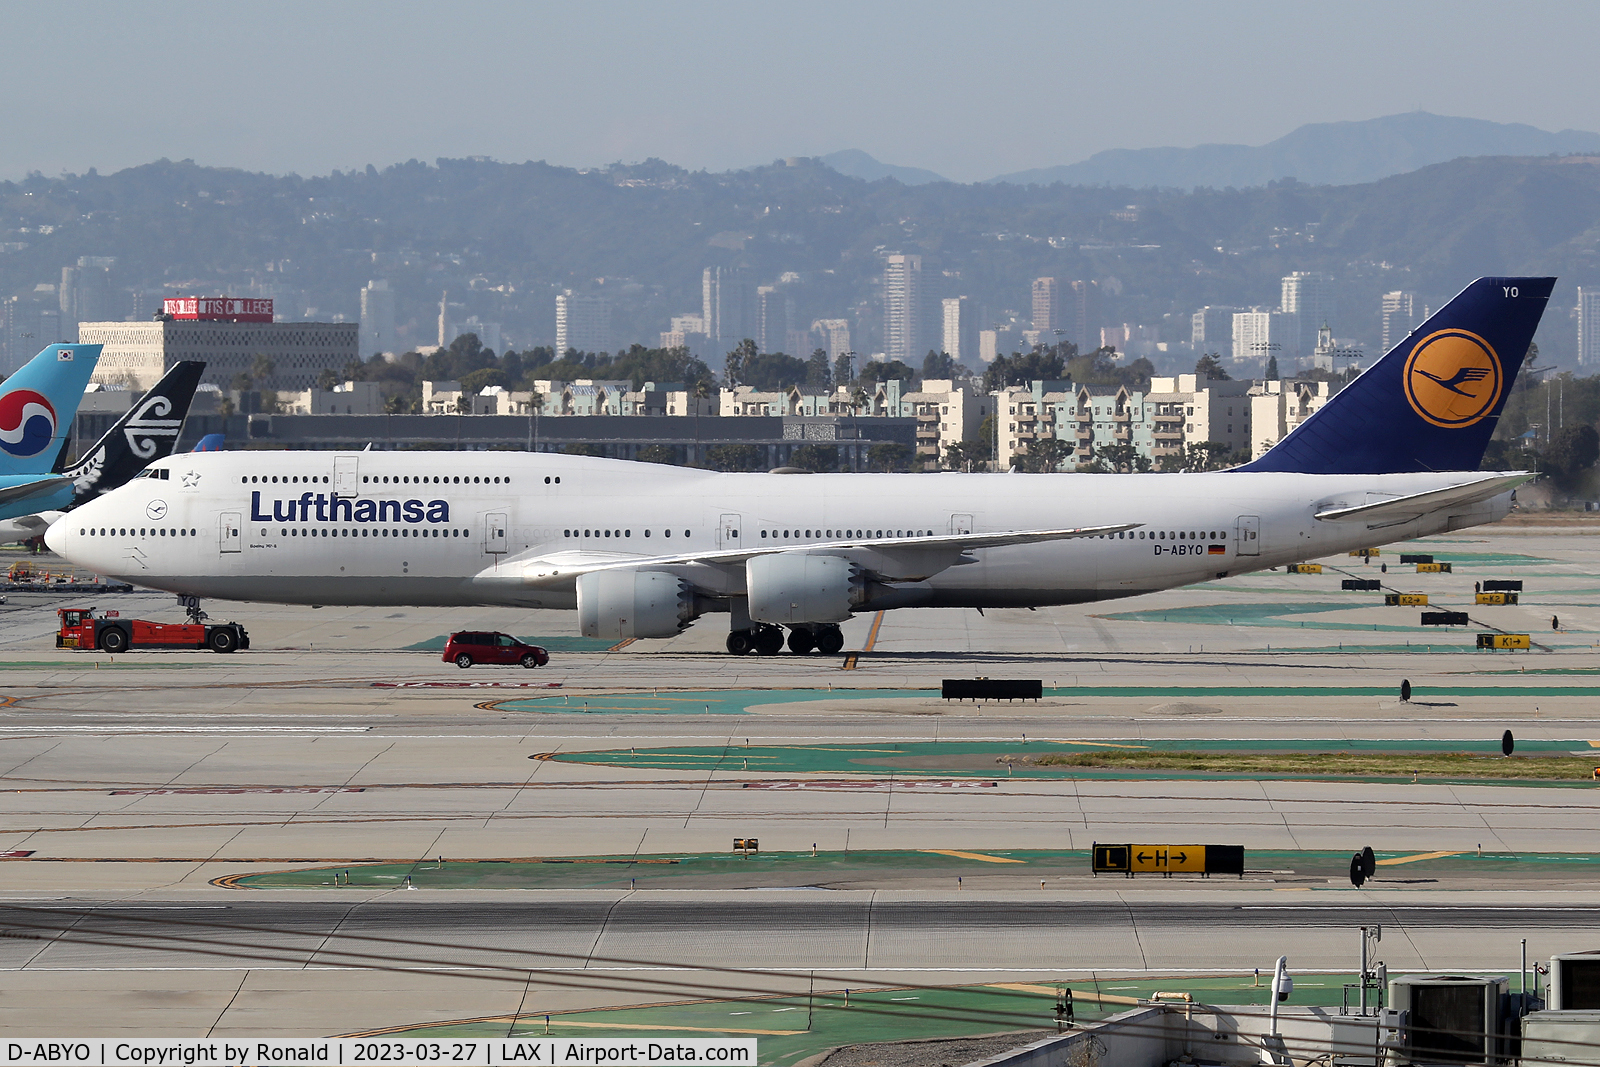 D-ABYO, 2014 Boeing 747-830 C/N 37841, at lax